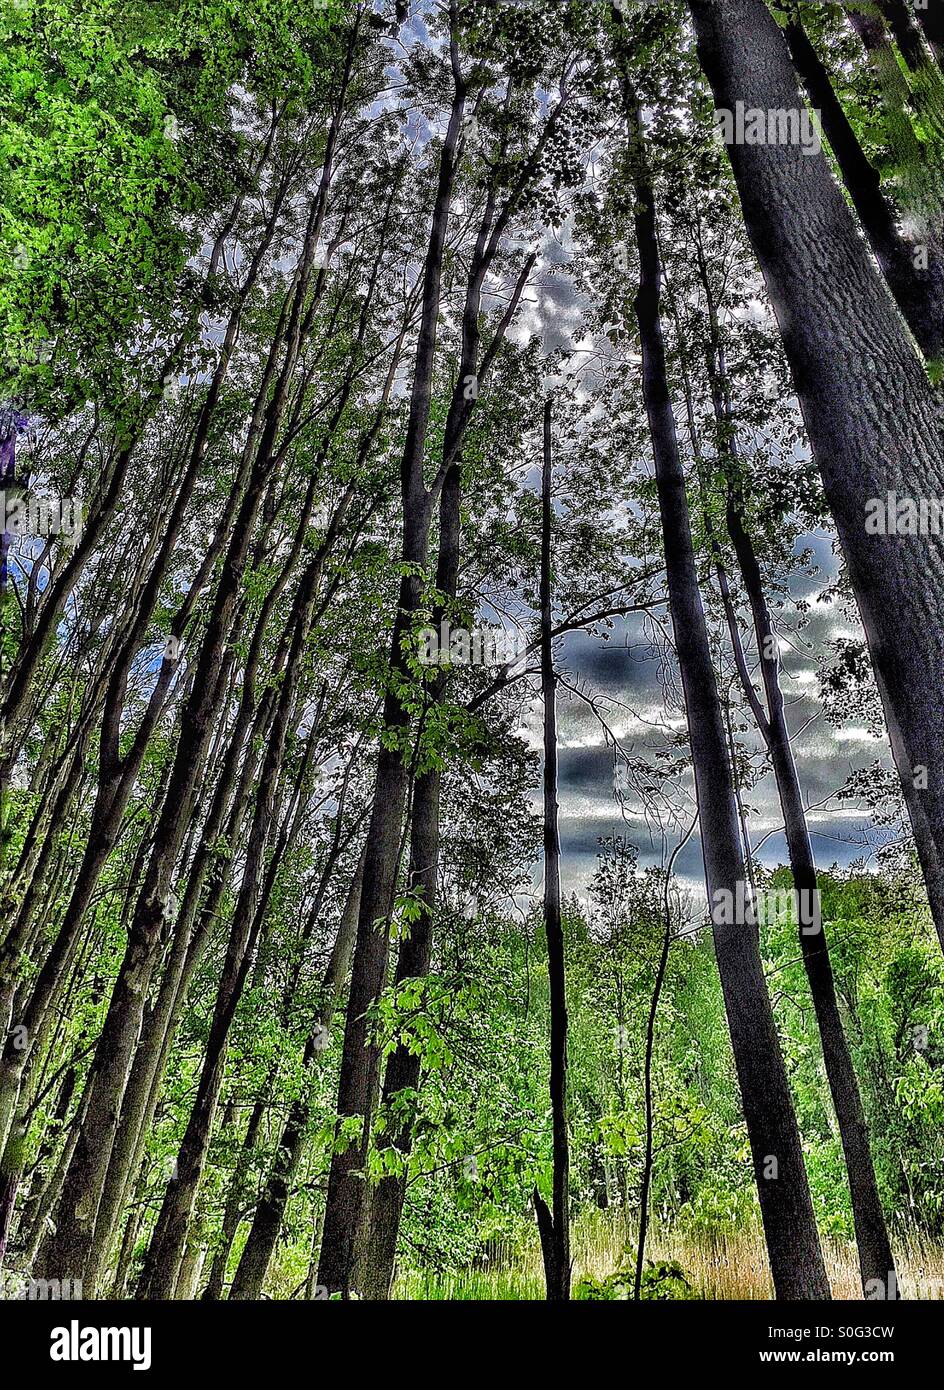 Tall trees stretch upward in the dark forest. Stock Photo